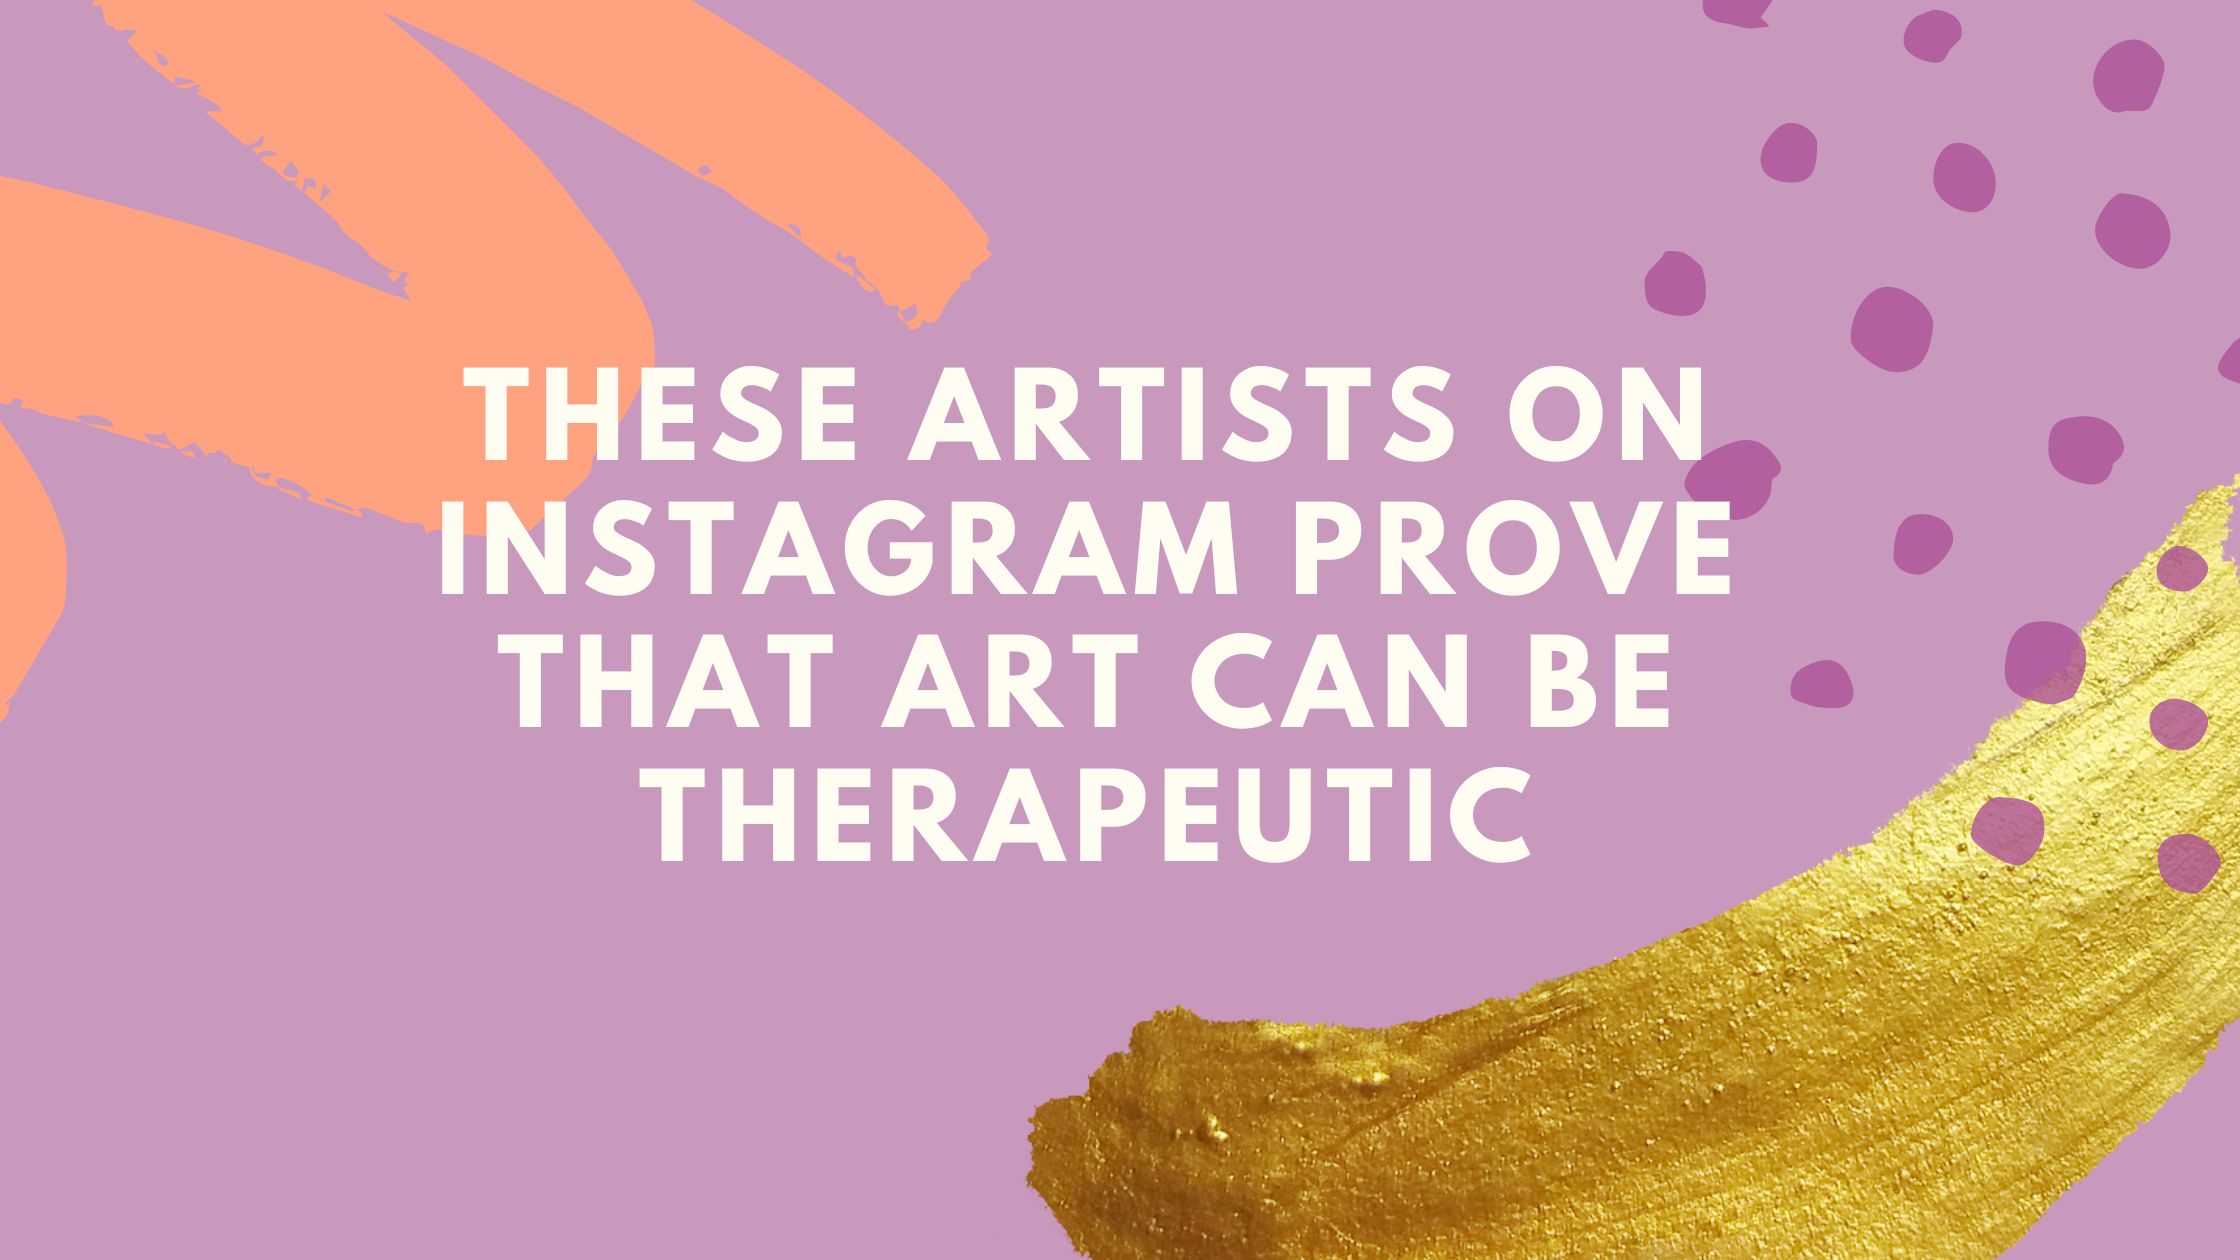 These artists on Instagram prove that art can be therapeutic